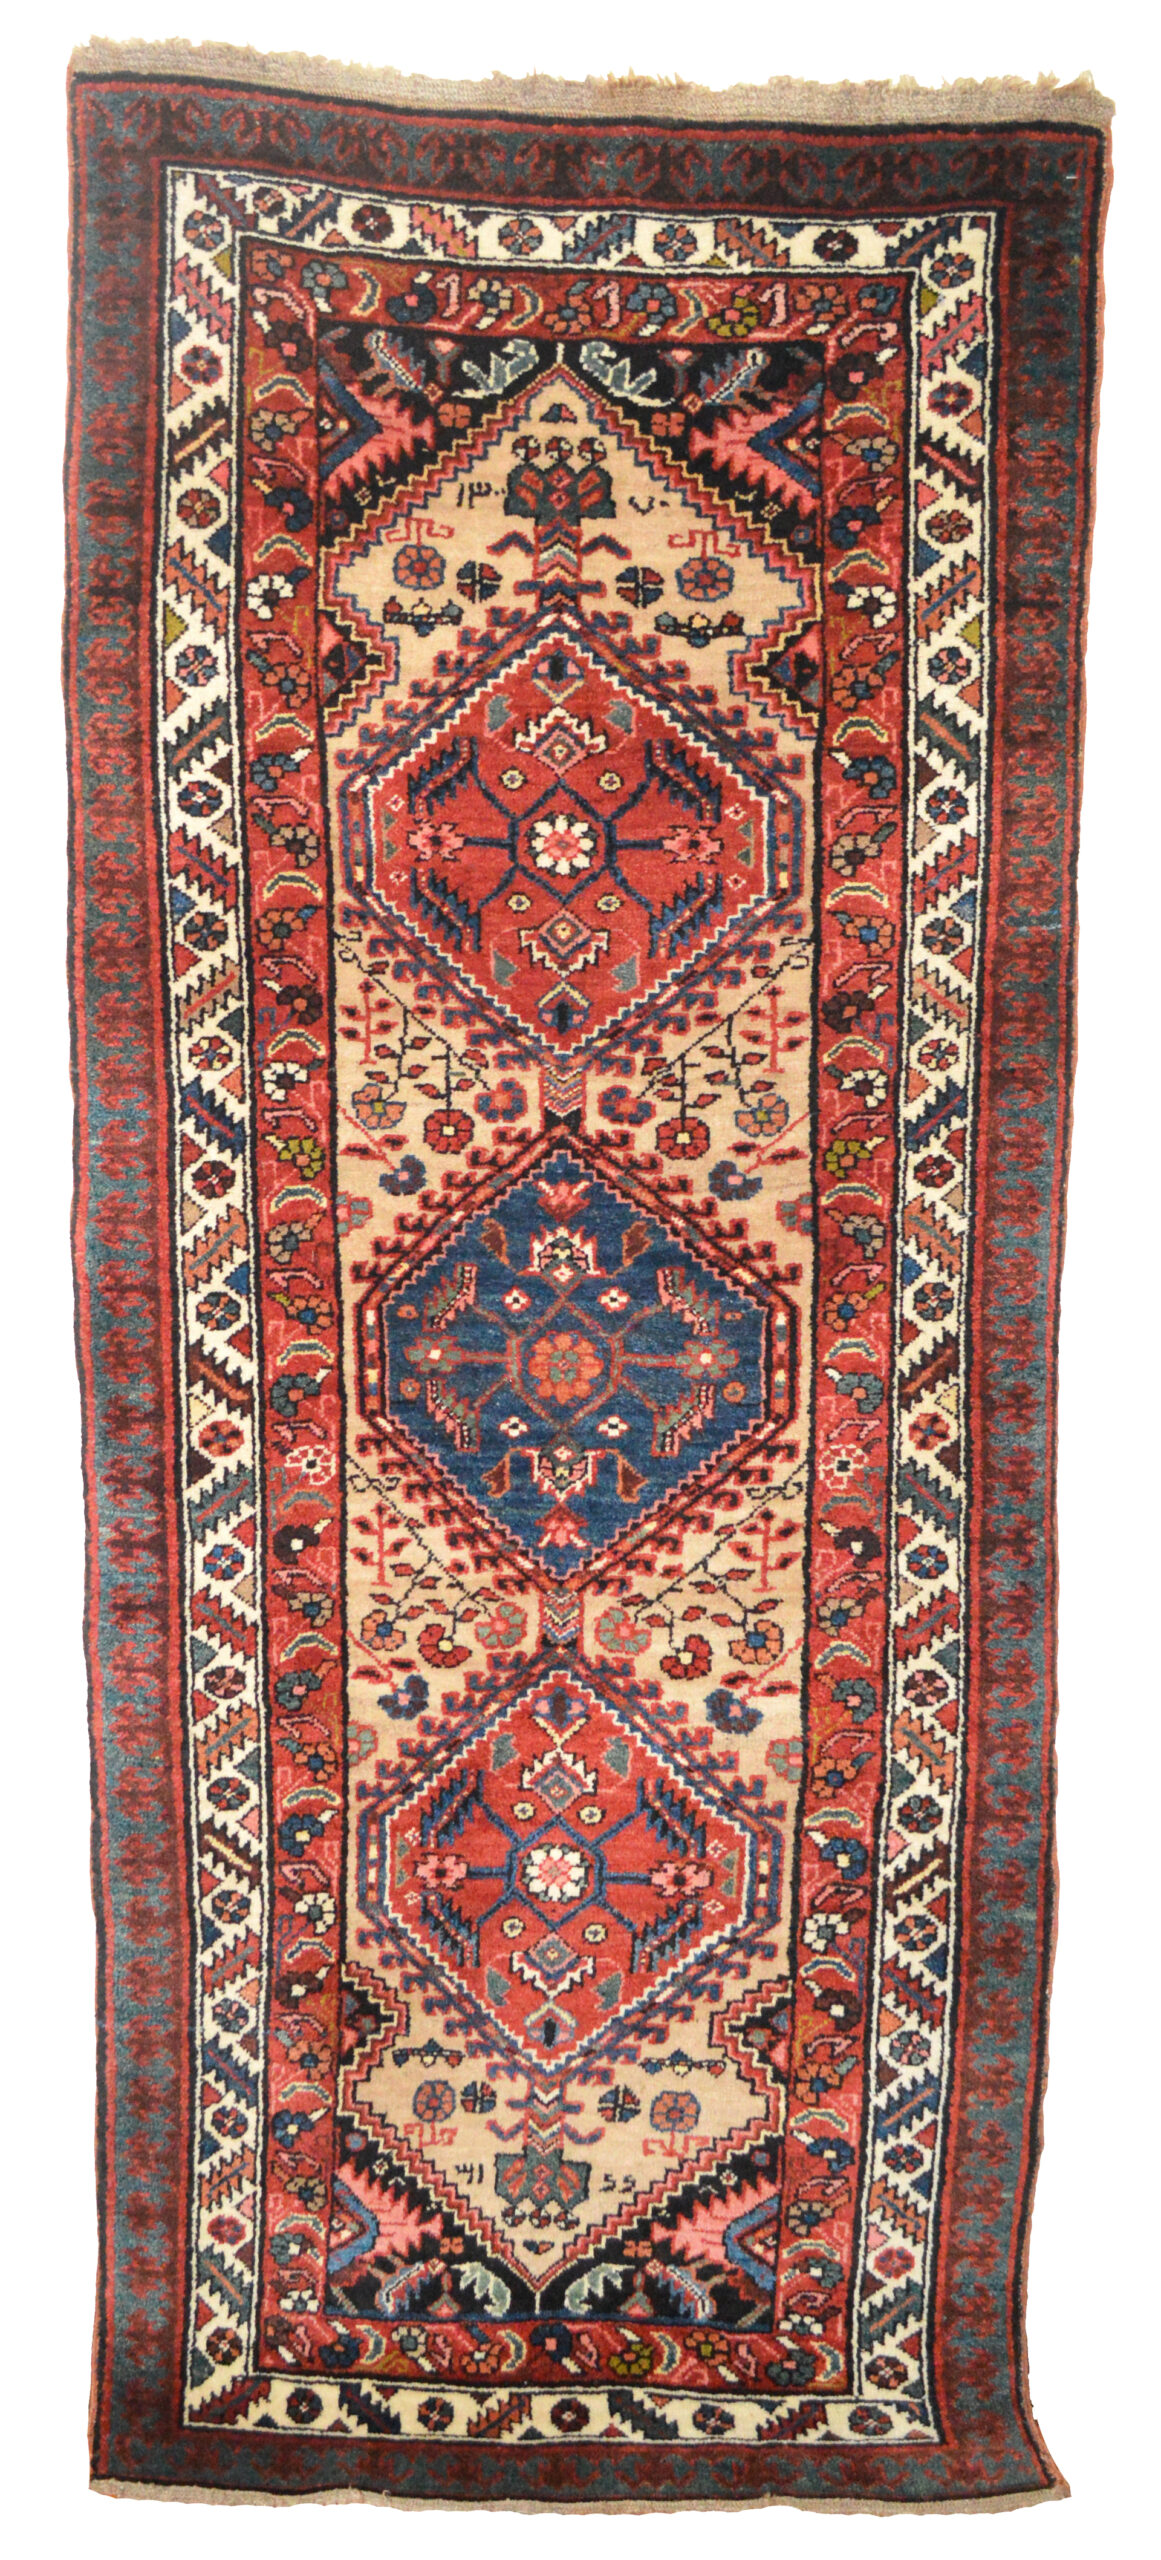 An antique northwest Persian Serab rug with medallions on a light camel color field, Douglas Stock Gallery, antique Persian rugs Boston,MA area